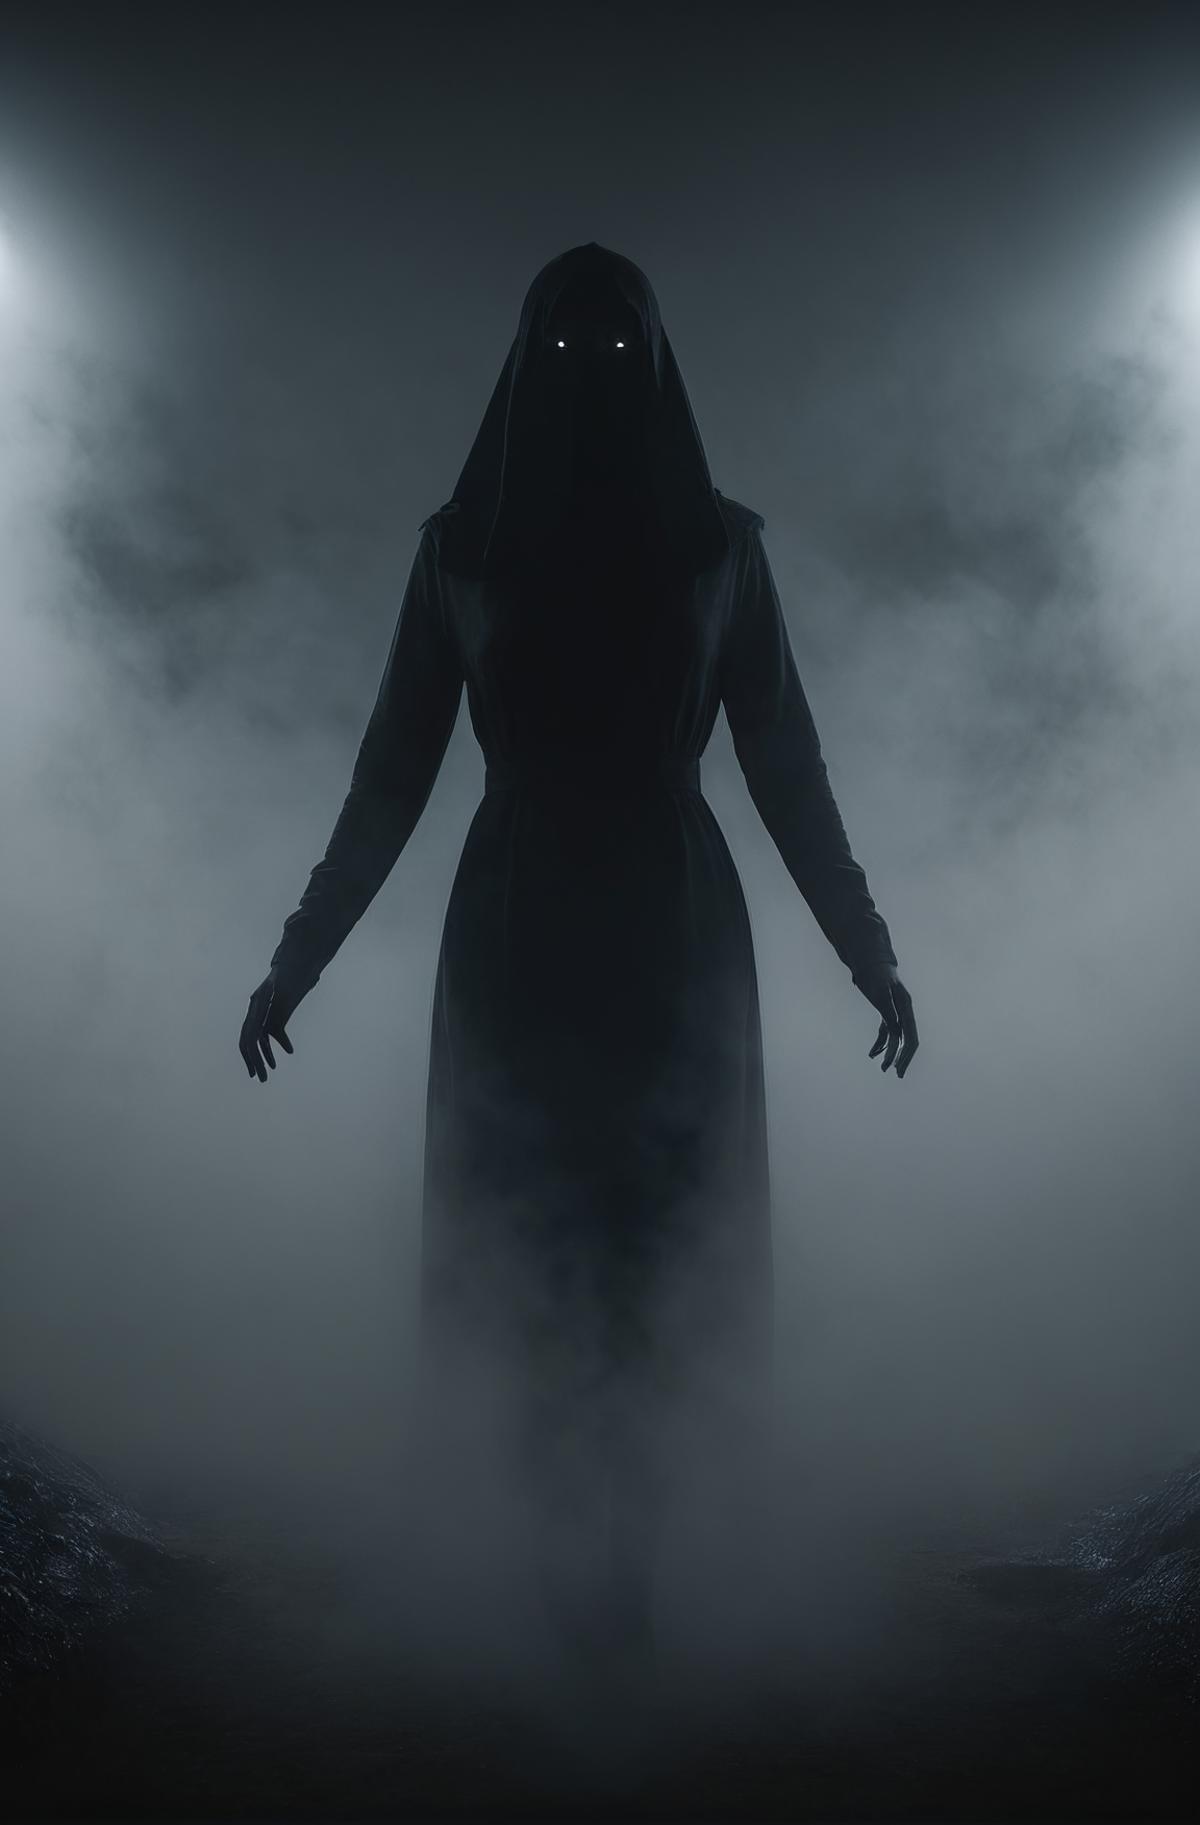 A silhouette of a woman with glowing eyes, wearing a black dress, standing in a foggy environment.